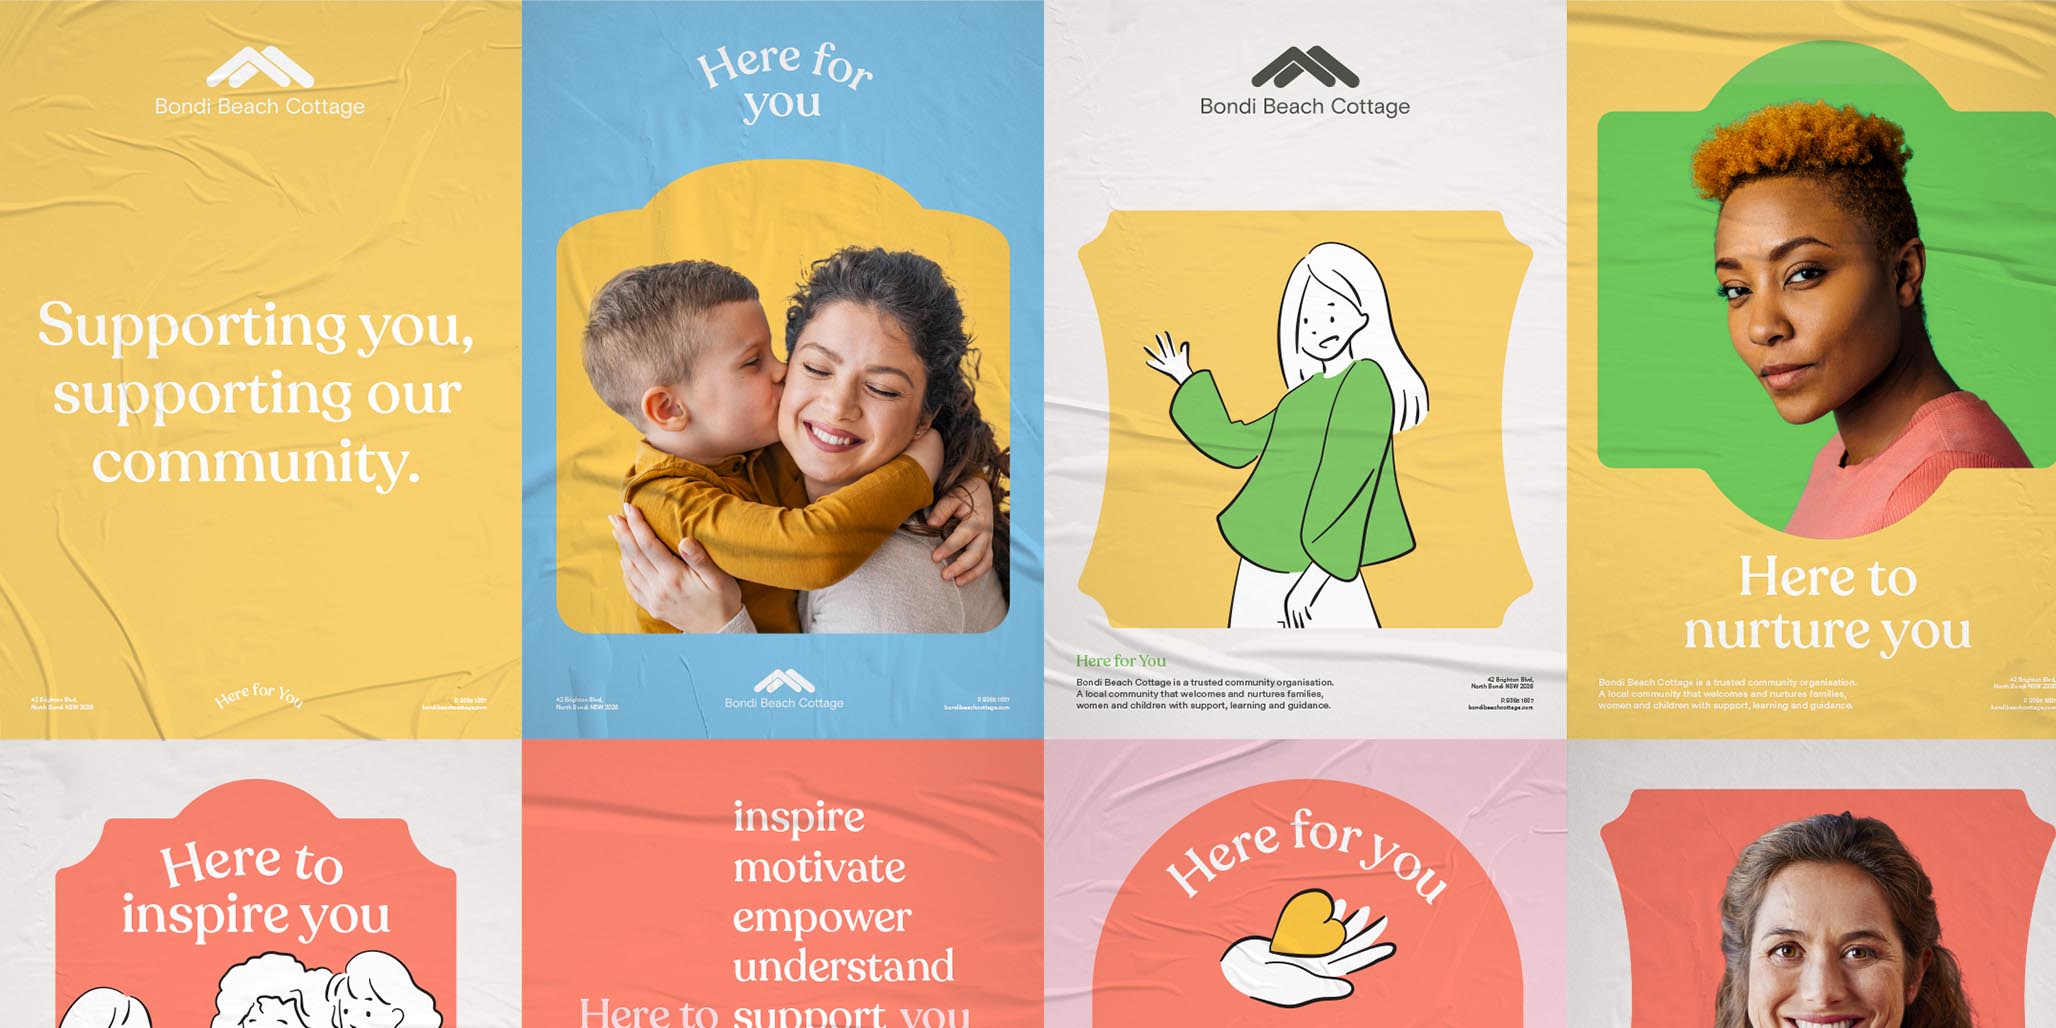 Branding strategy for a community service organisation in Australia by brand designers, Percept, Image G